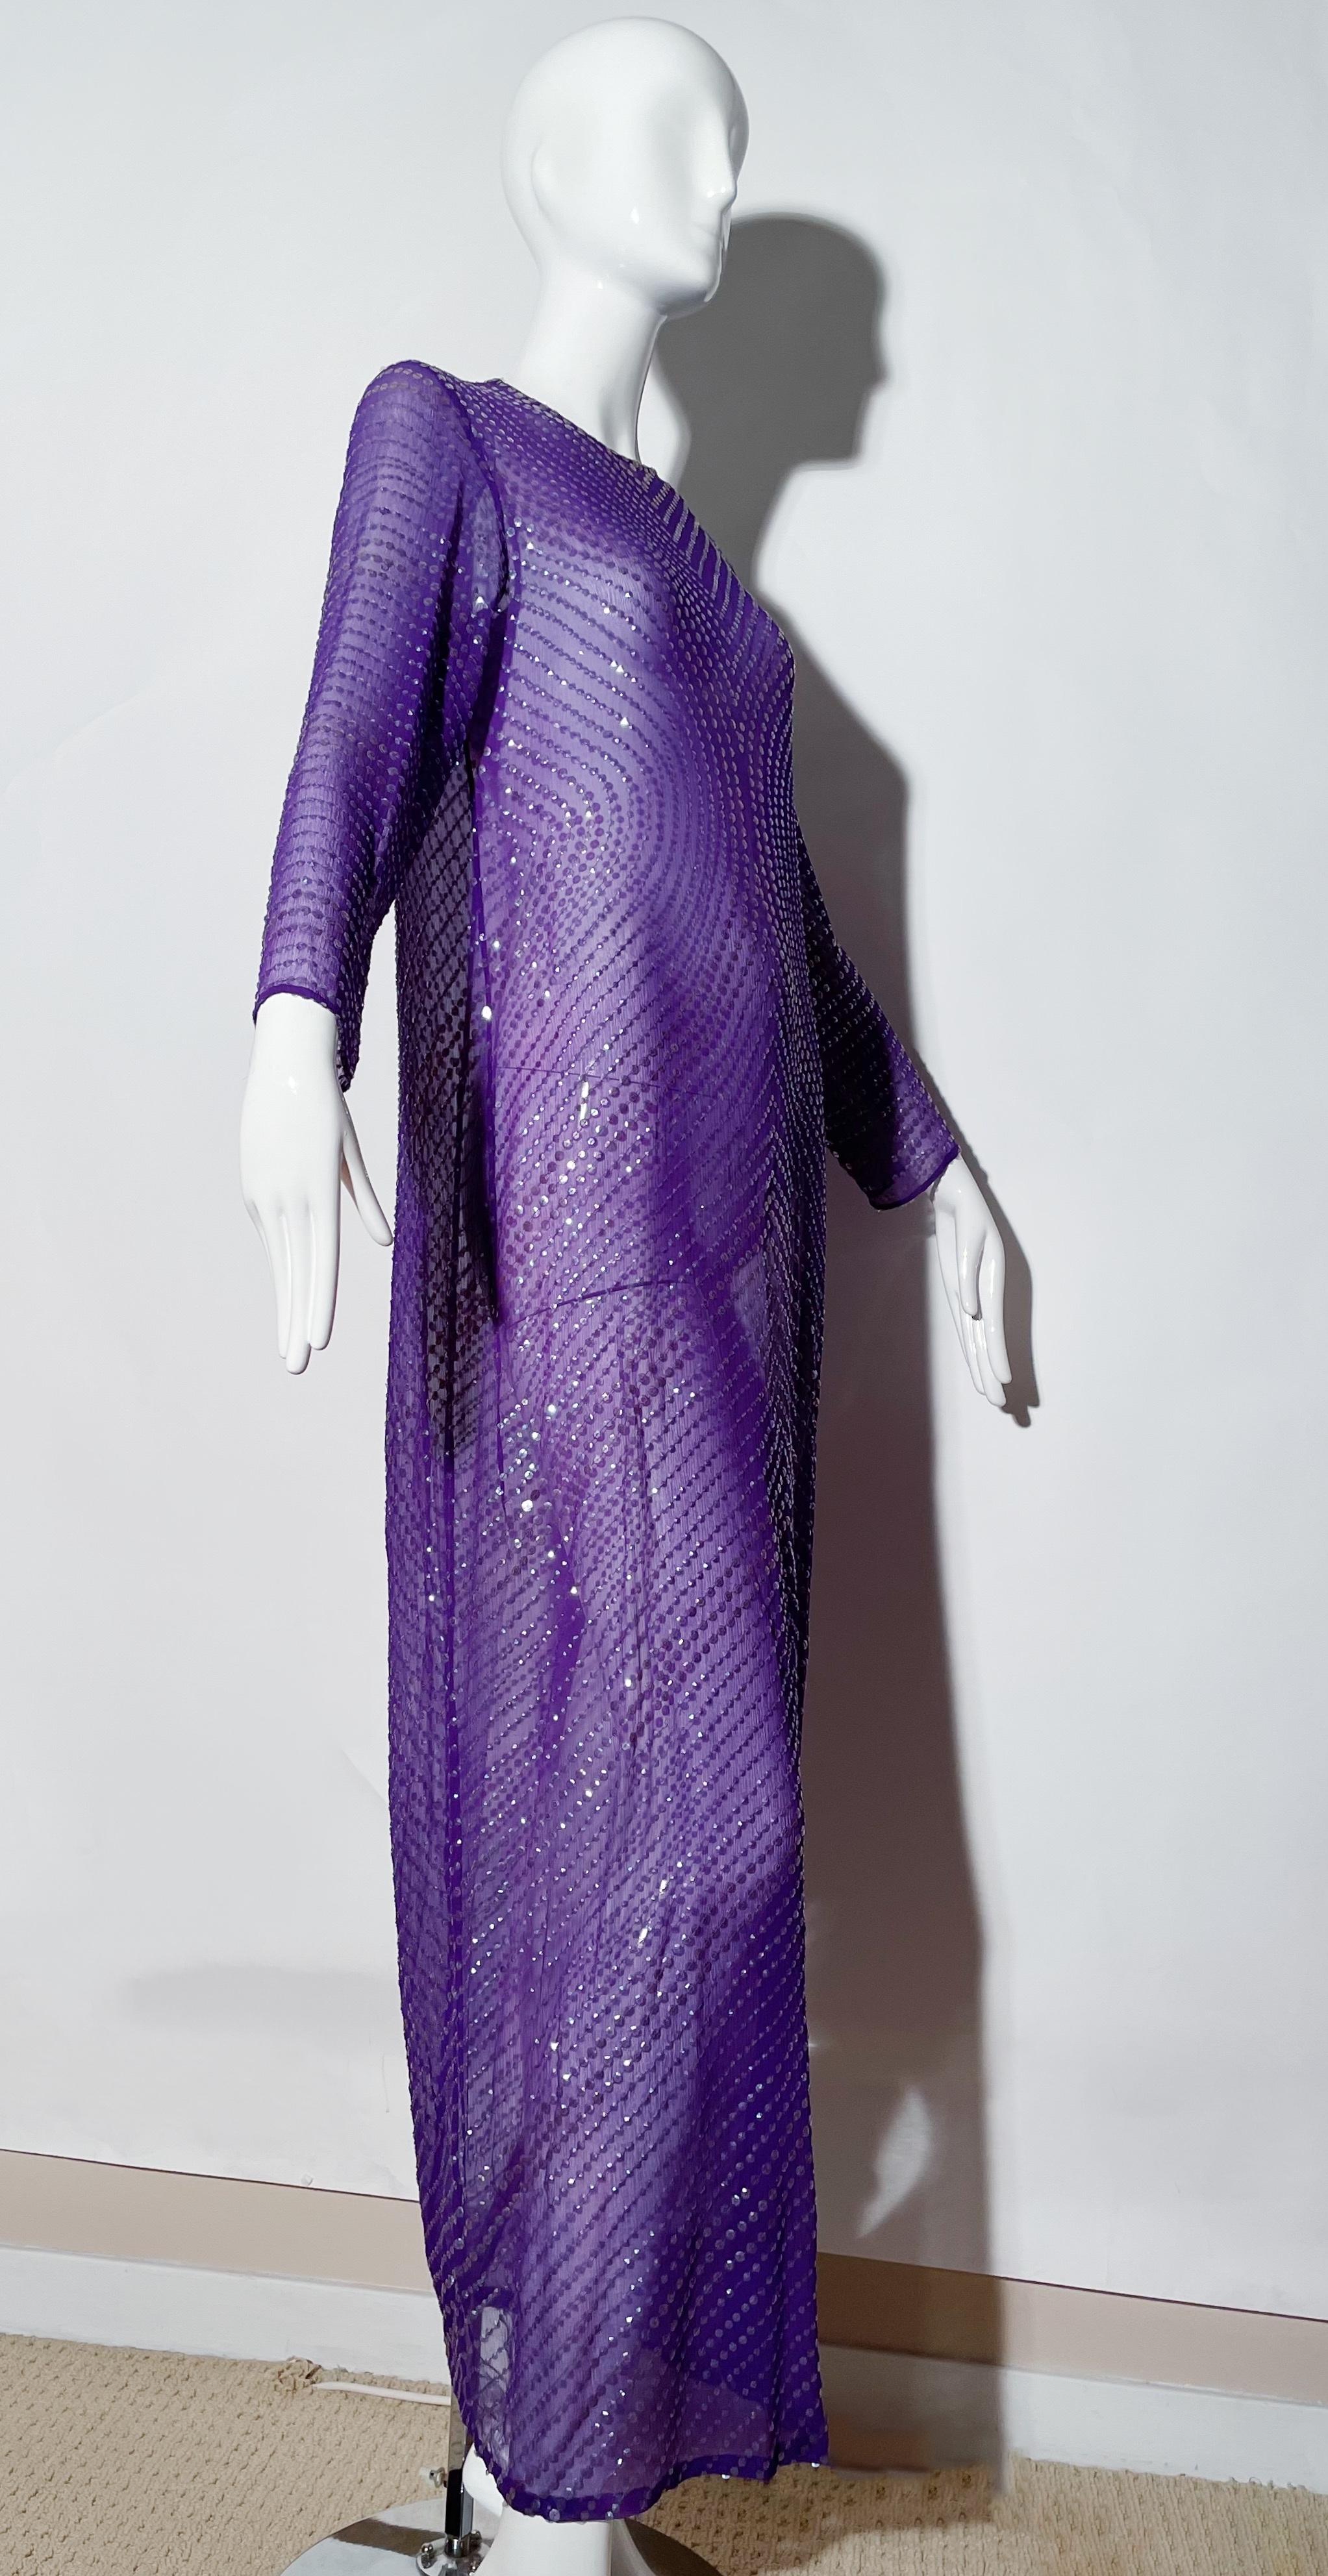 Sheer purple maxi gown. Longsleeve. Sequin detail. Rear snap closures. Silk. 
*Condition: excellent vintage condition. No visible flaws.

Measurements Taken Laying Flat (inches)—
Shoulder to Shoulder: 16 in.
Bust: 36 in.
Waist: 38 in.
Hip: 38